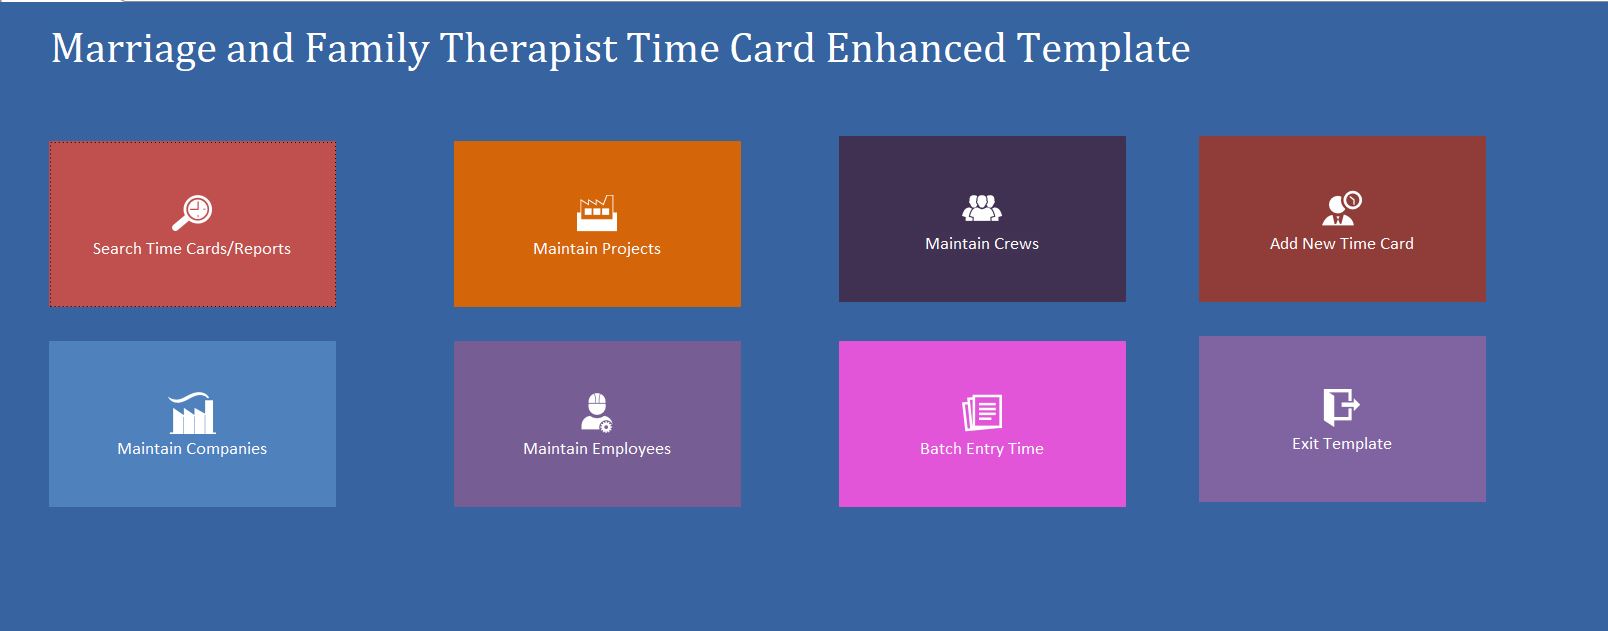  Enhanced Marriage and Family Time Card Template | Time Card Database